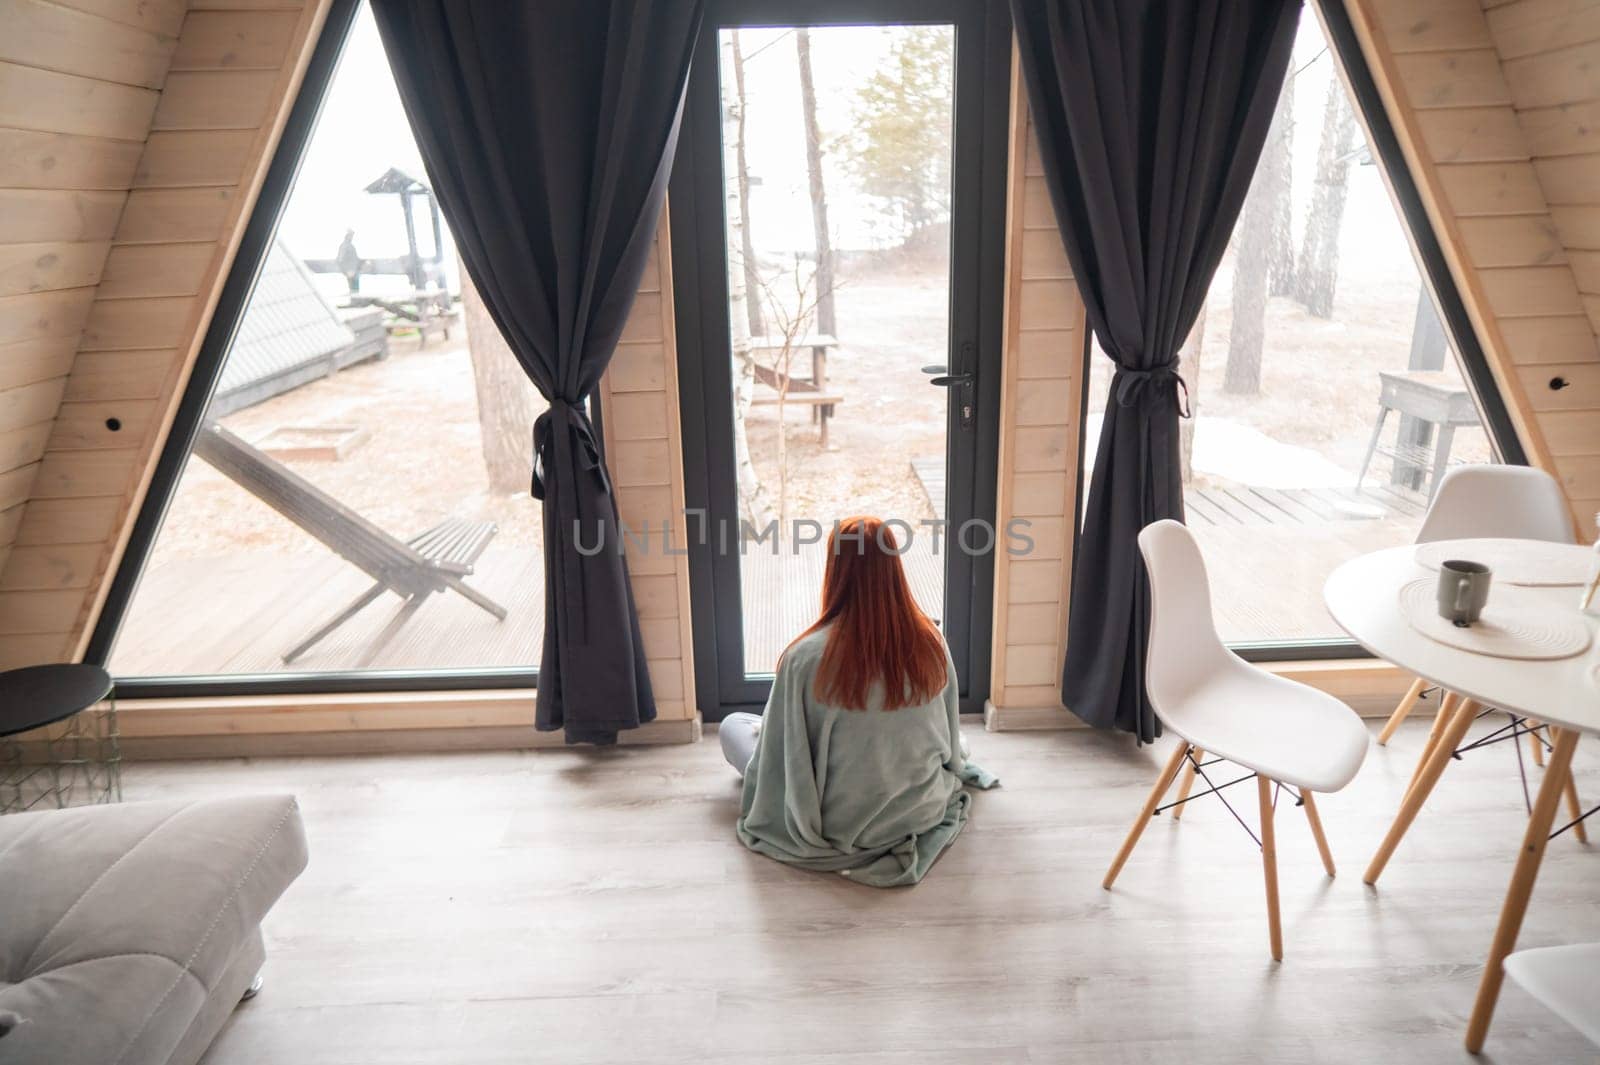 Rear view of a red-haired woman wrapped in a blanket looking out the patio window